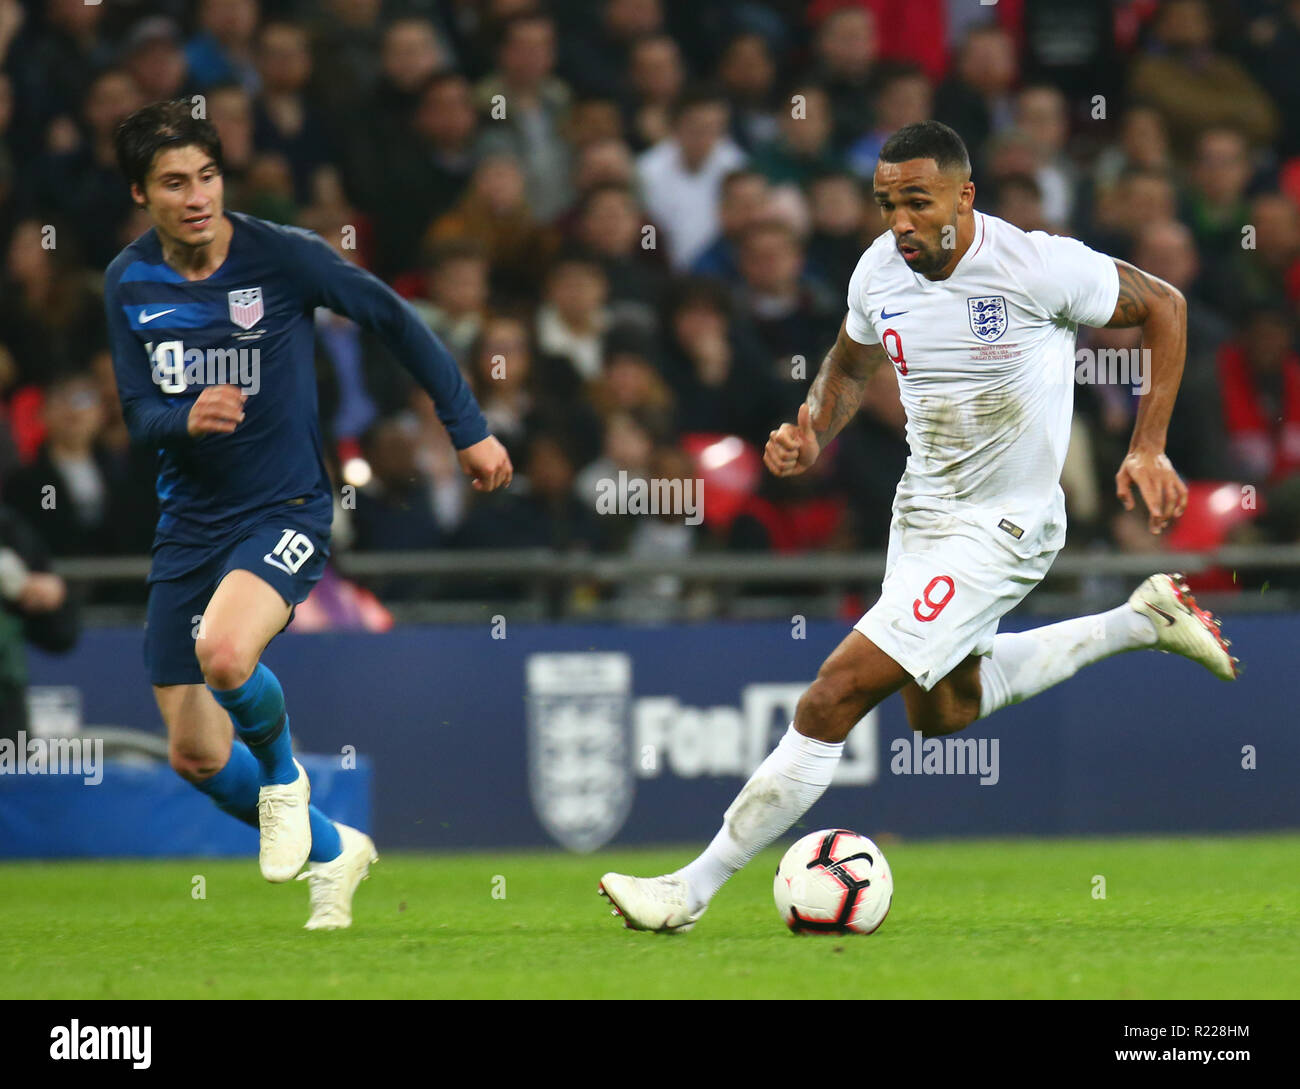 London, UK. 15th November, 2018. Callum Wilson of England   during the friendly soccer match between England and USA at the Wembley Stadium in London, England, on 15 November 2018.  Credit Action Foto Sport Credit: Action Foto Sport/Alamy Live News Stock Photo